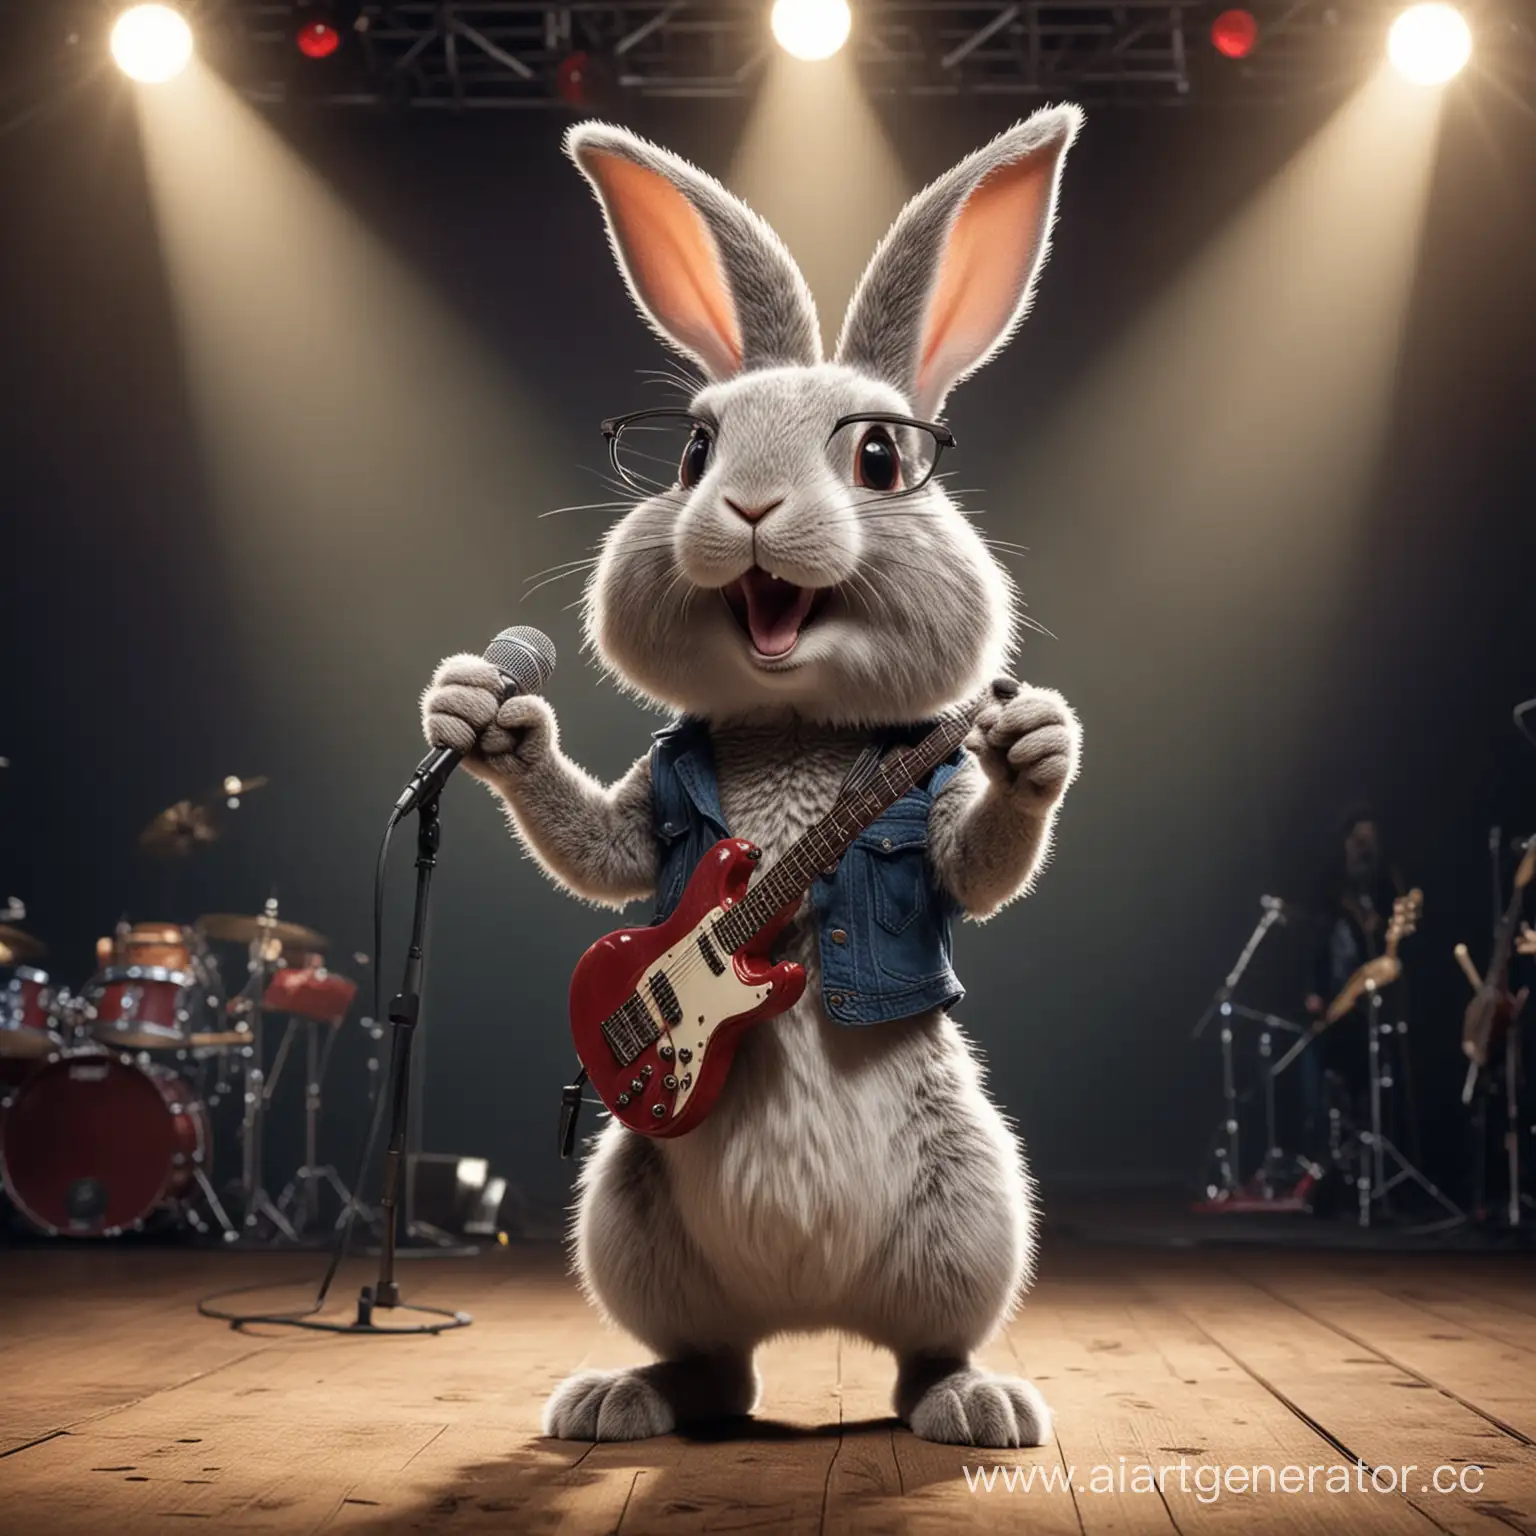 Rock-Rabbit-Performing-Cool-Rock-Song-on-Stage